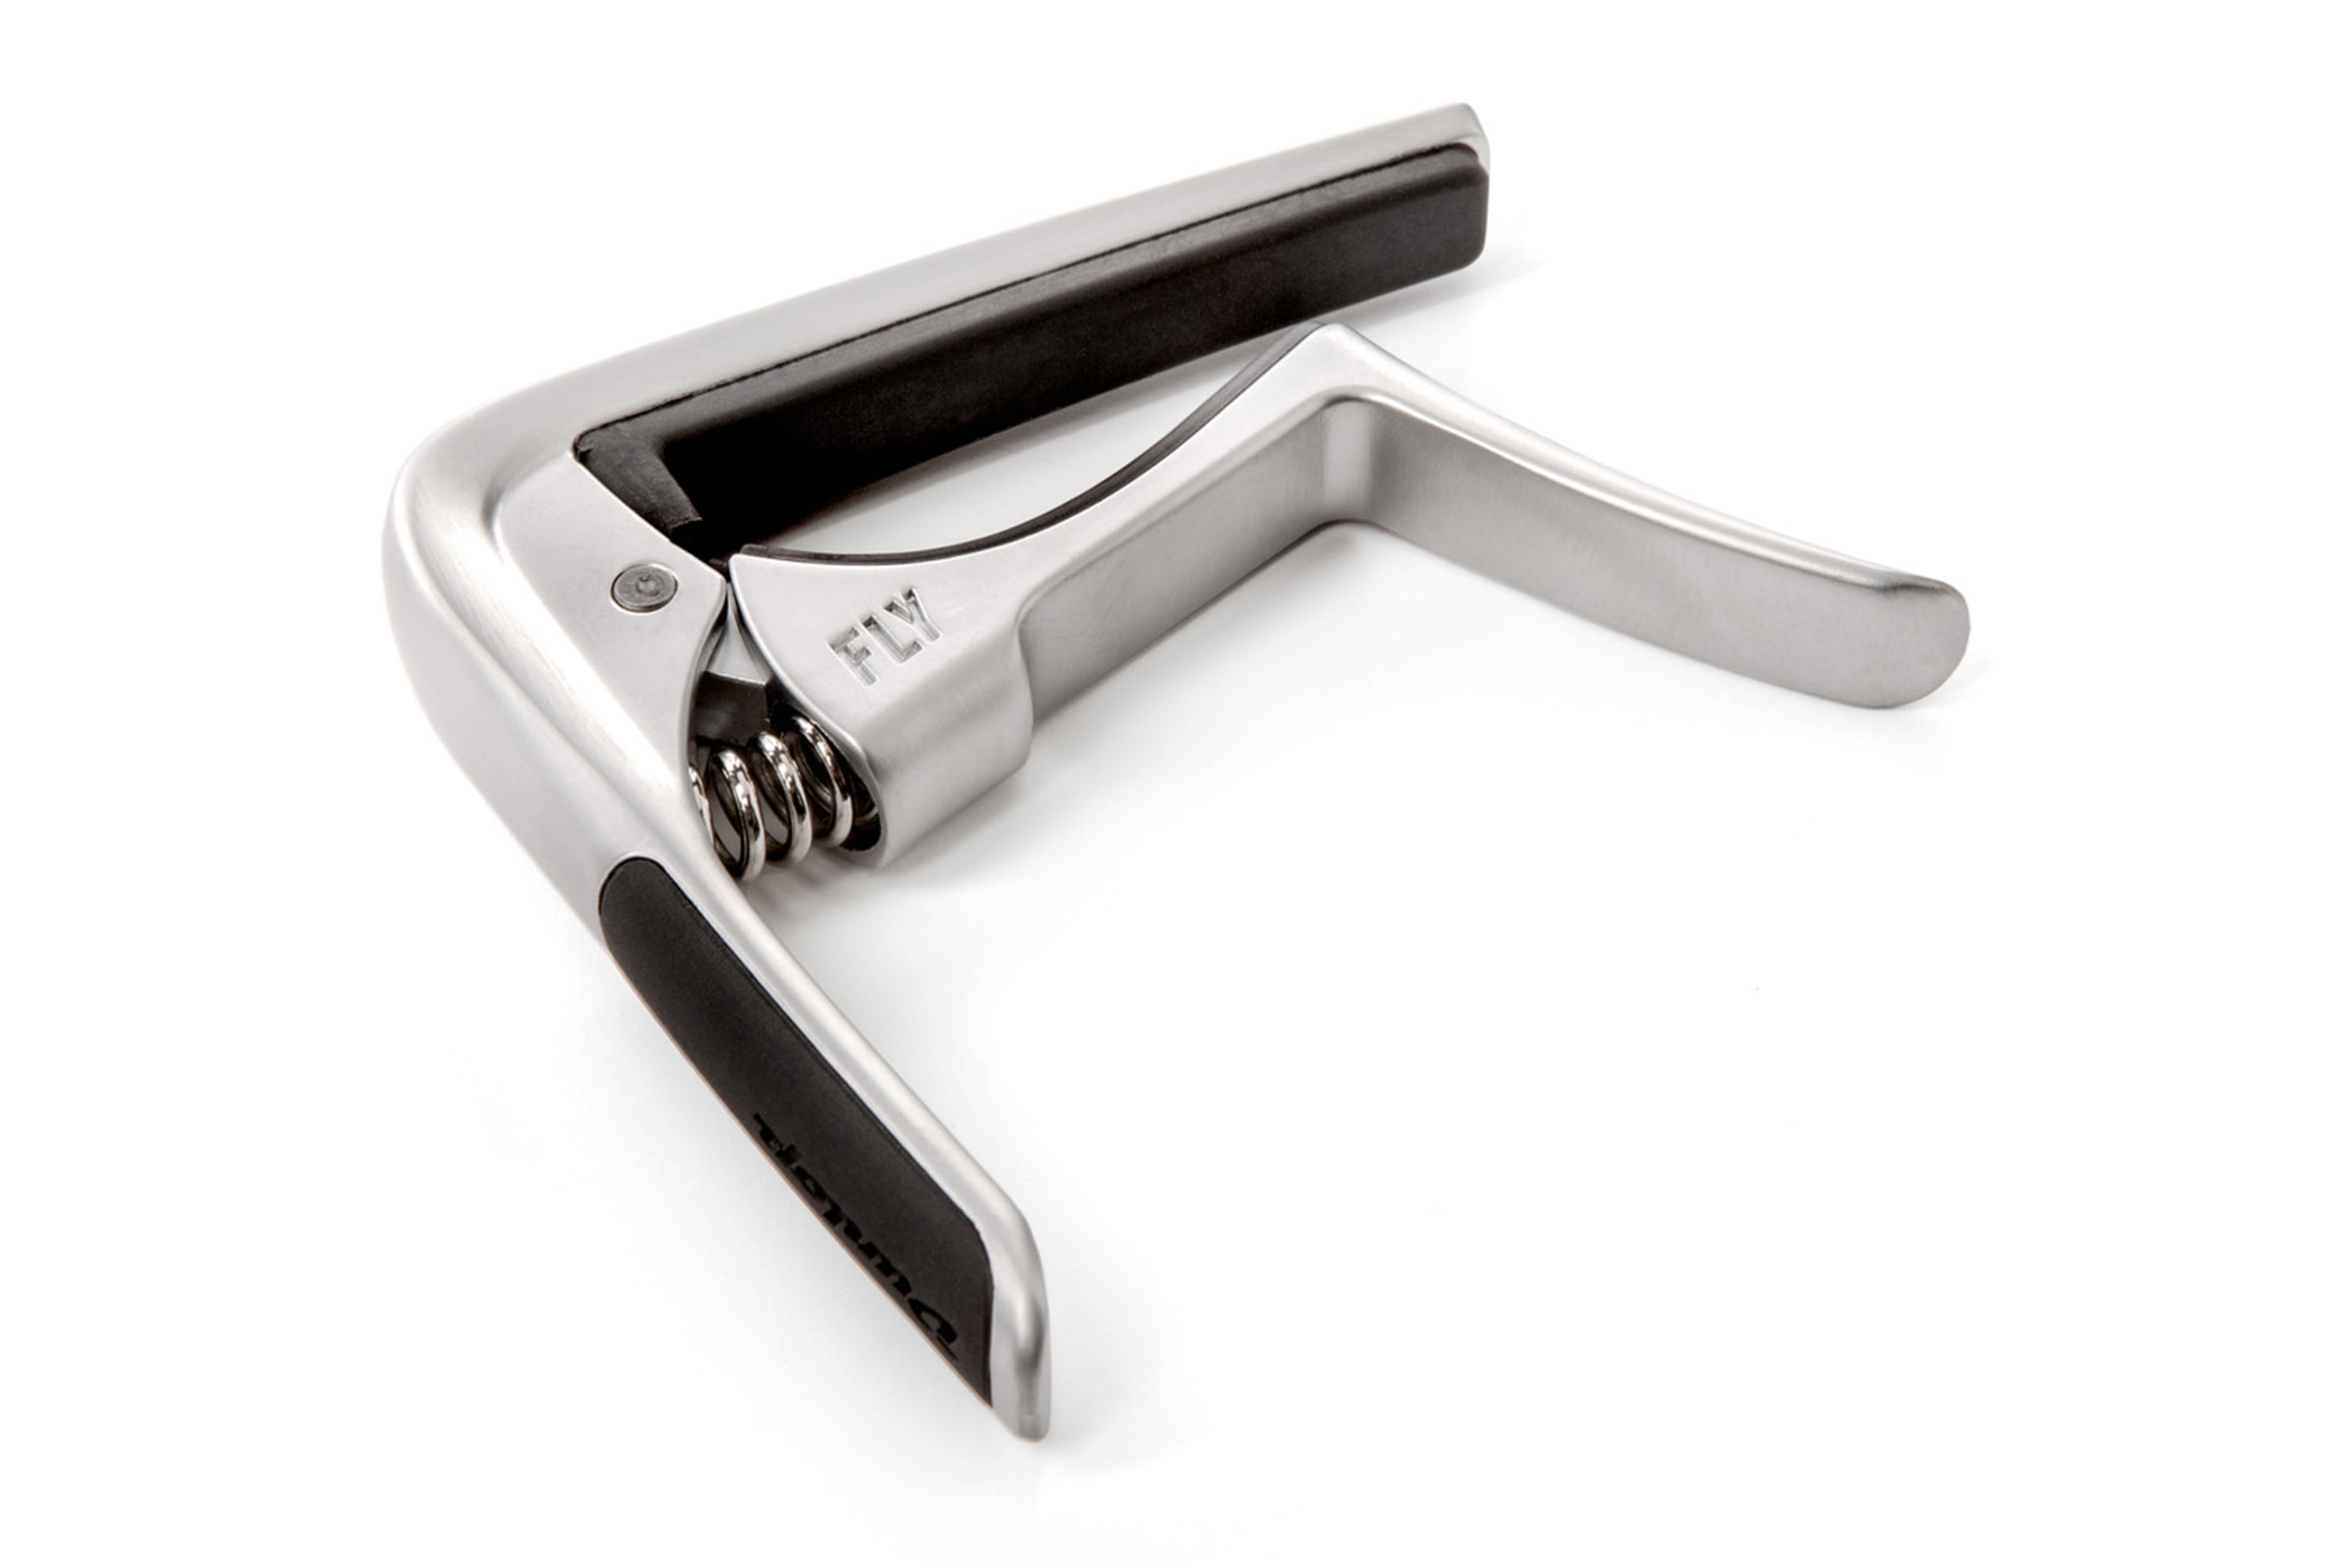 Dunlop 63CSC Trigger Fly Capo